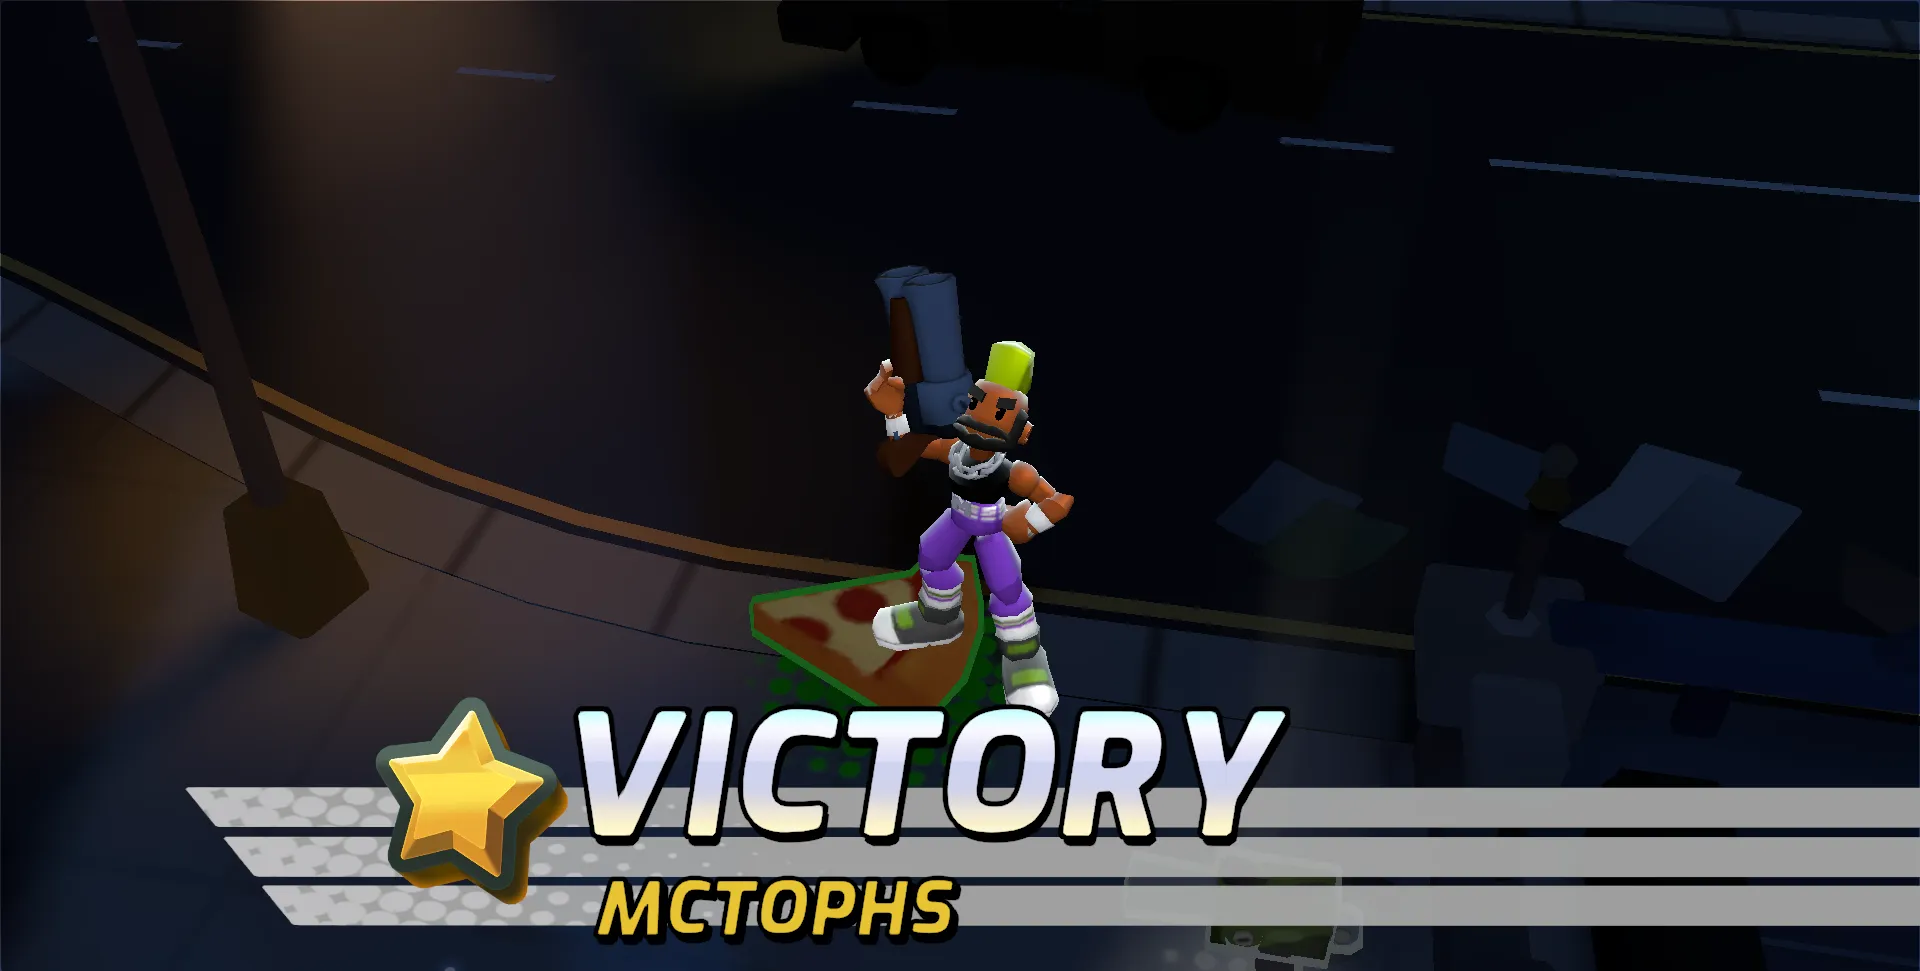 The image displays the Victory Poster of Mighty Action Heroes, showcasing the hero after a player has won a match and become the last survivor.